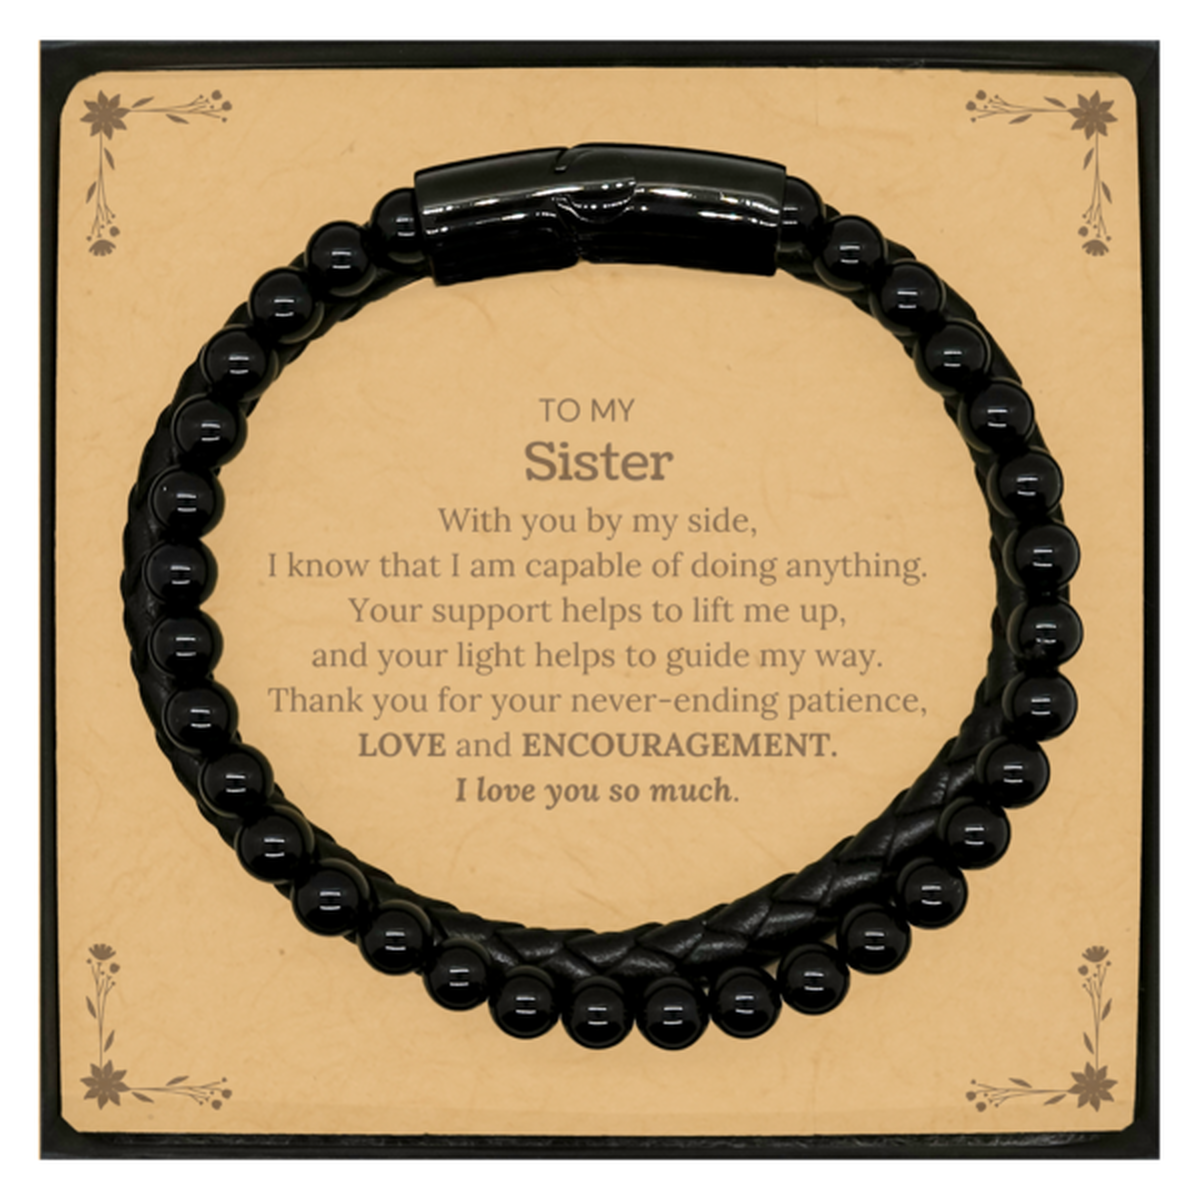 Appreciation Sister Stone Leather Bracelets Gifts, To My Sister Birthday Christmas Wedding Keepsake Gifts for Sister With you by my side, I know that I am capable of doing anything. I love you so much